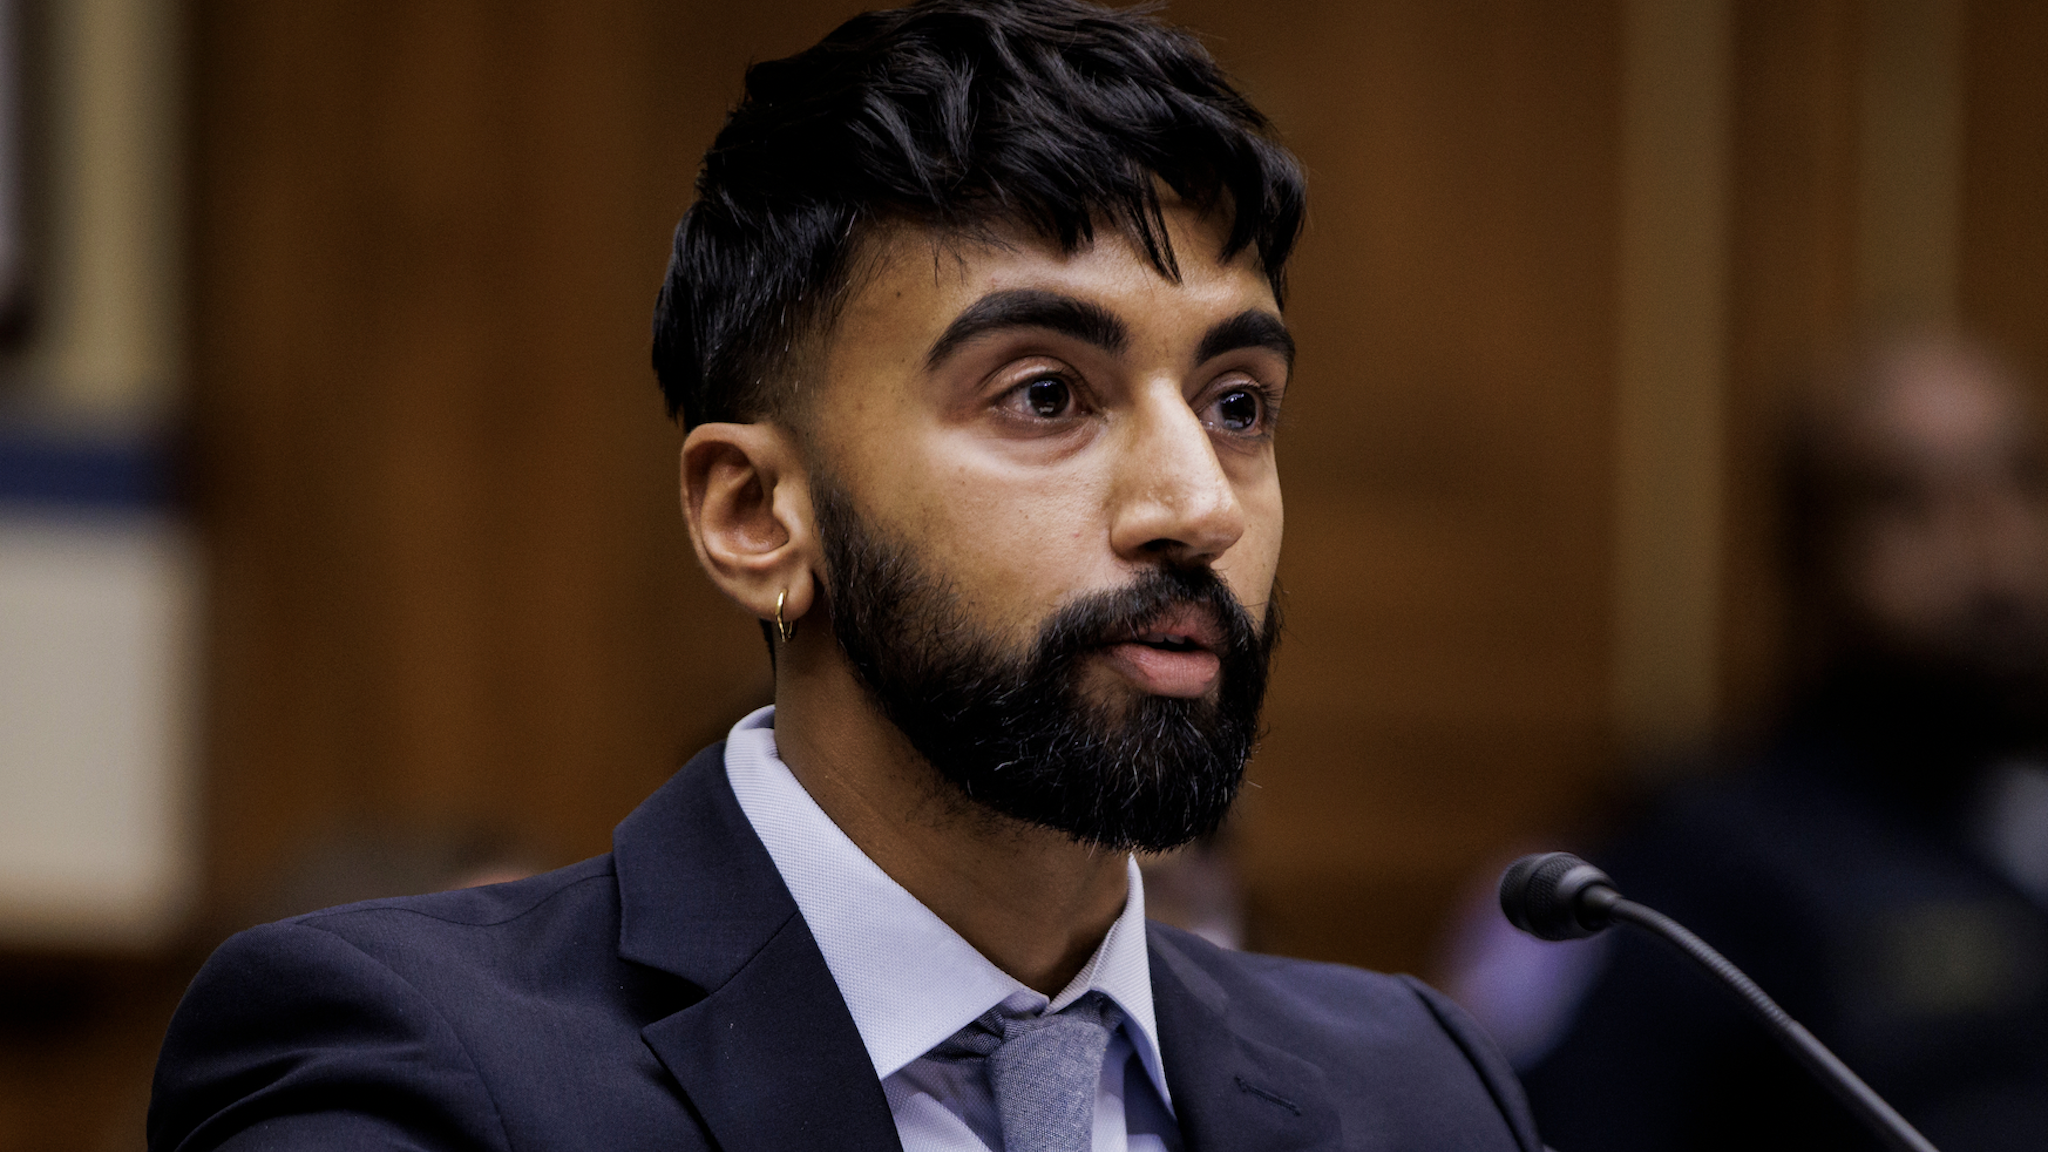 Bhavik Kumar, medical director for primary and trans care at Planned Parenthood Gulf Coast, testifies during a House Oversight and Reform Committee hearing in Washington, DC, US, on Thursday, Sept. 29, 2022. The hearing is titled "Examining the Harm to Patients from Abortion Restrictions and the Threat of a National Abortion Ban."